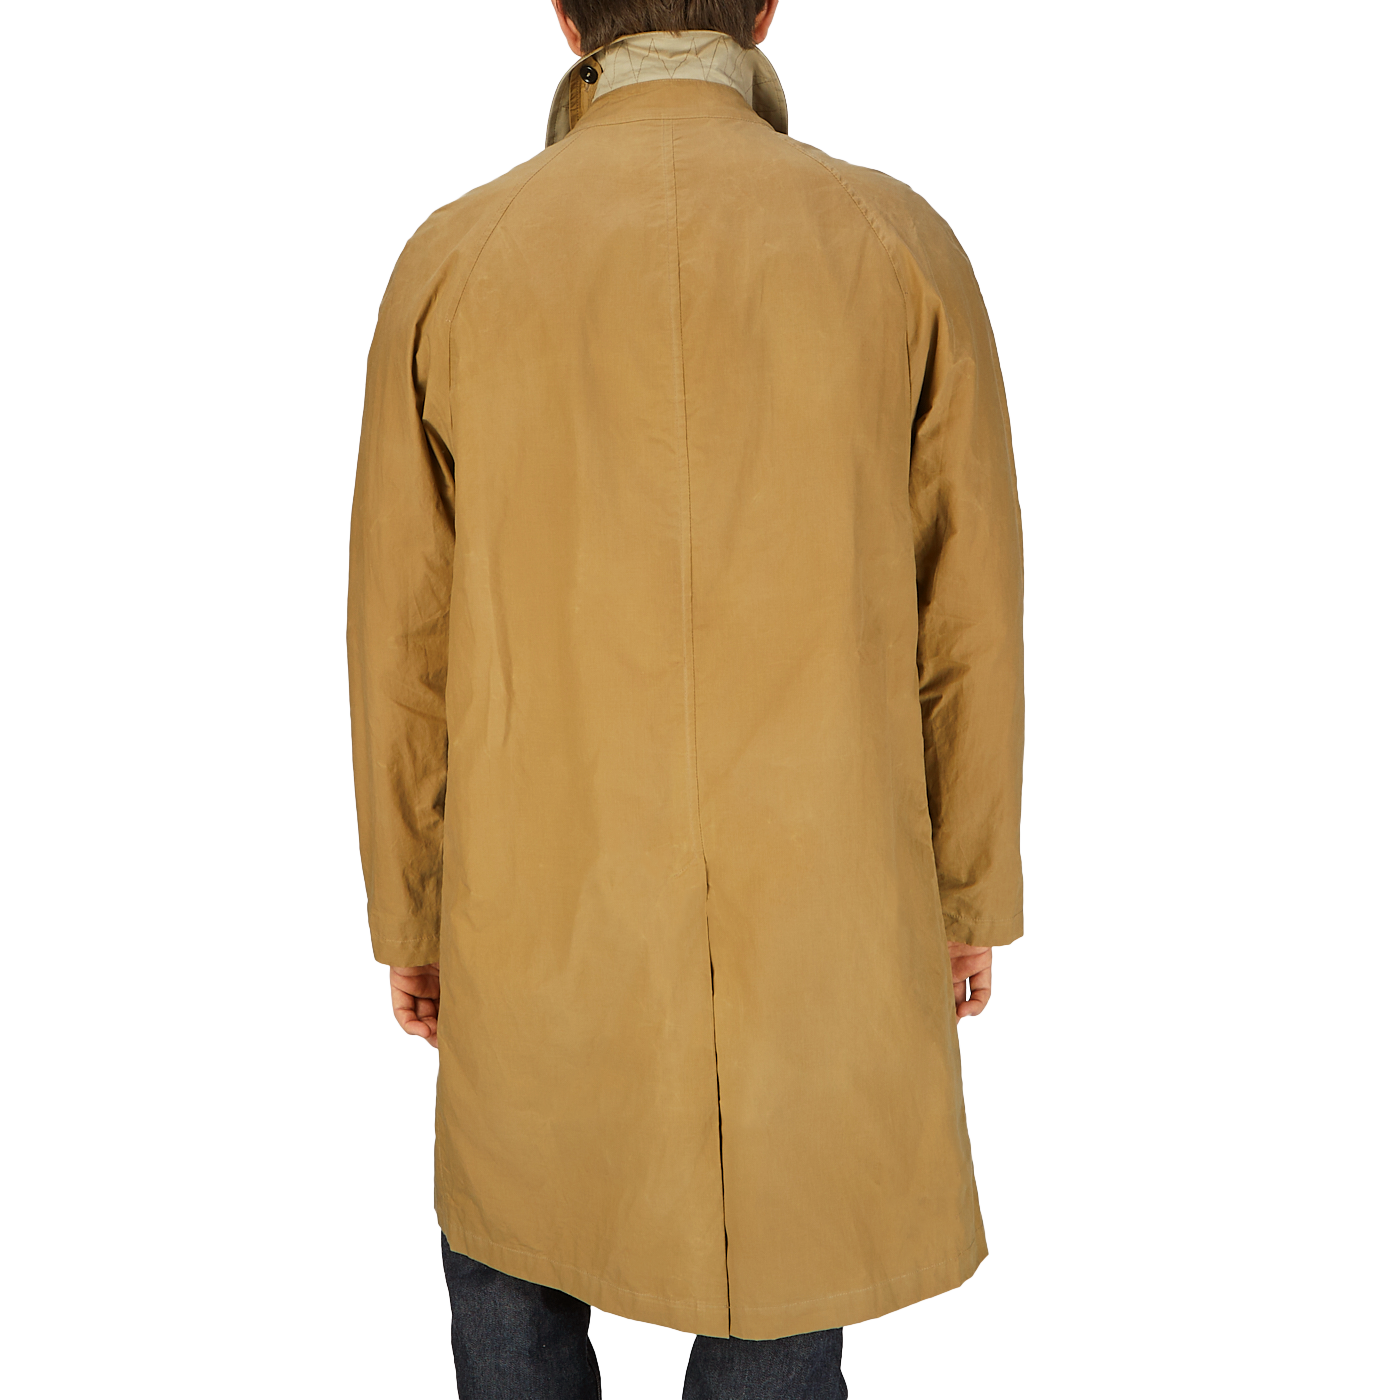 The back view of a man wearing a Dark Beige Waxed Cotton Kamikaze Trenchcoat by L'Impermeabile.